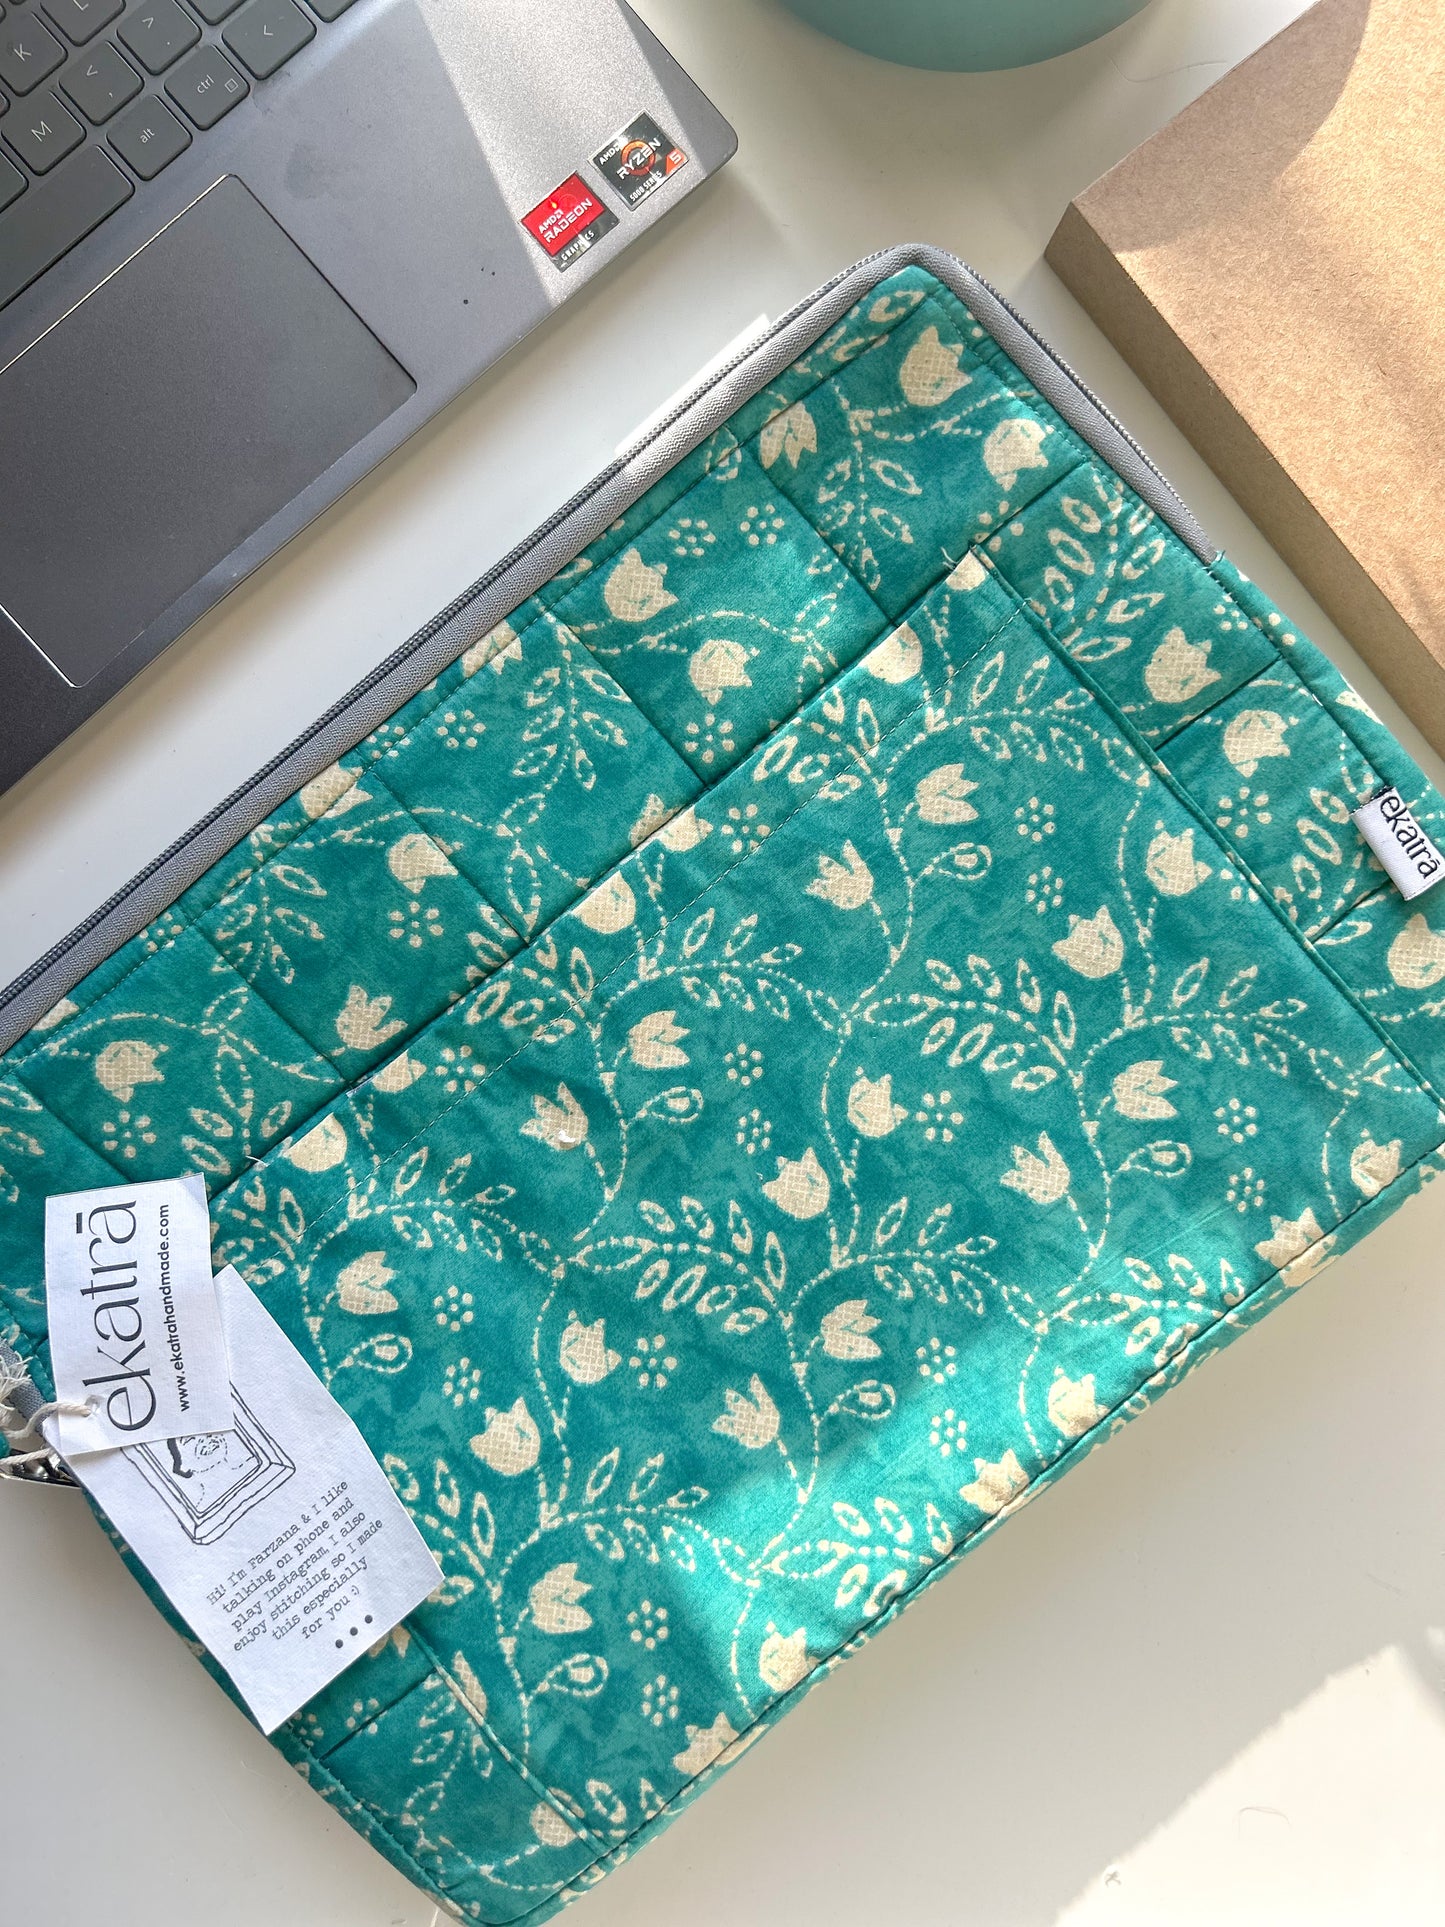 Sustainable Handmade Cotton Laptop Sleeve/Laptop Cover by Ekatra - Teal Floral